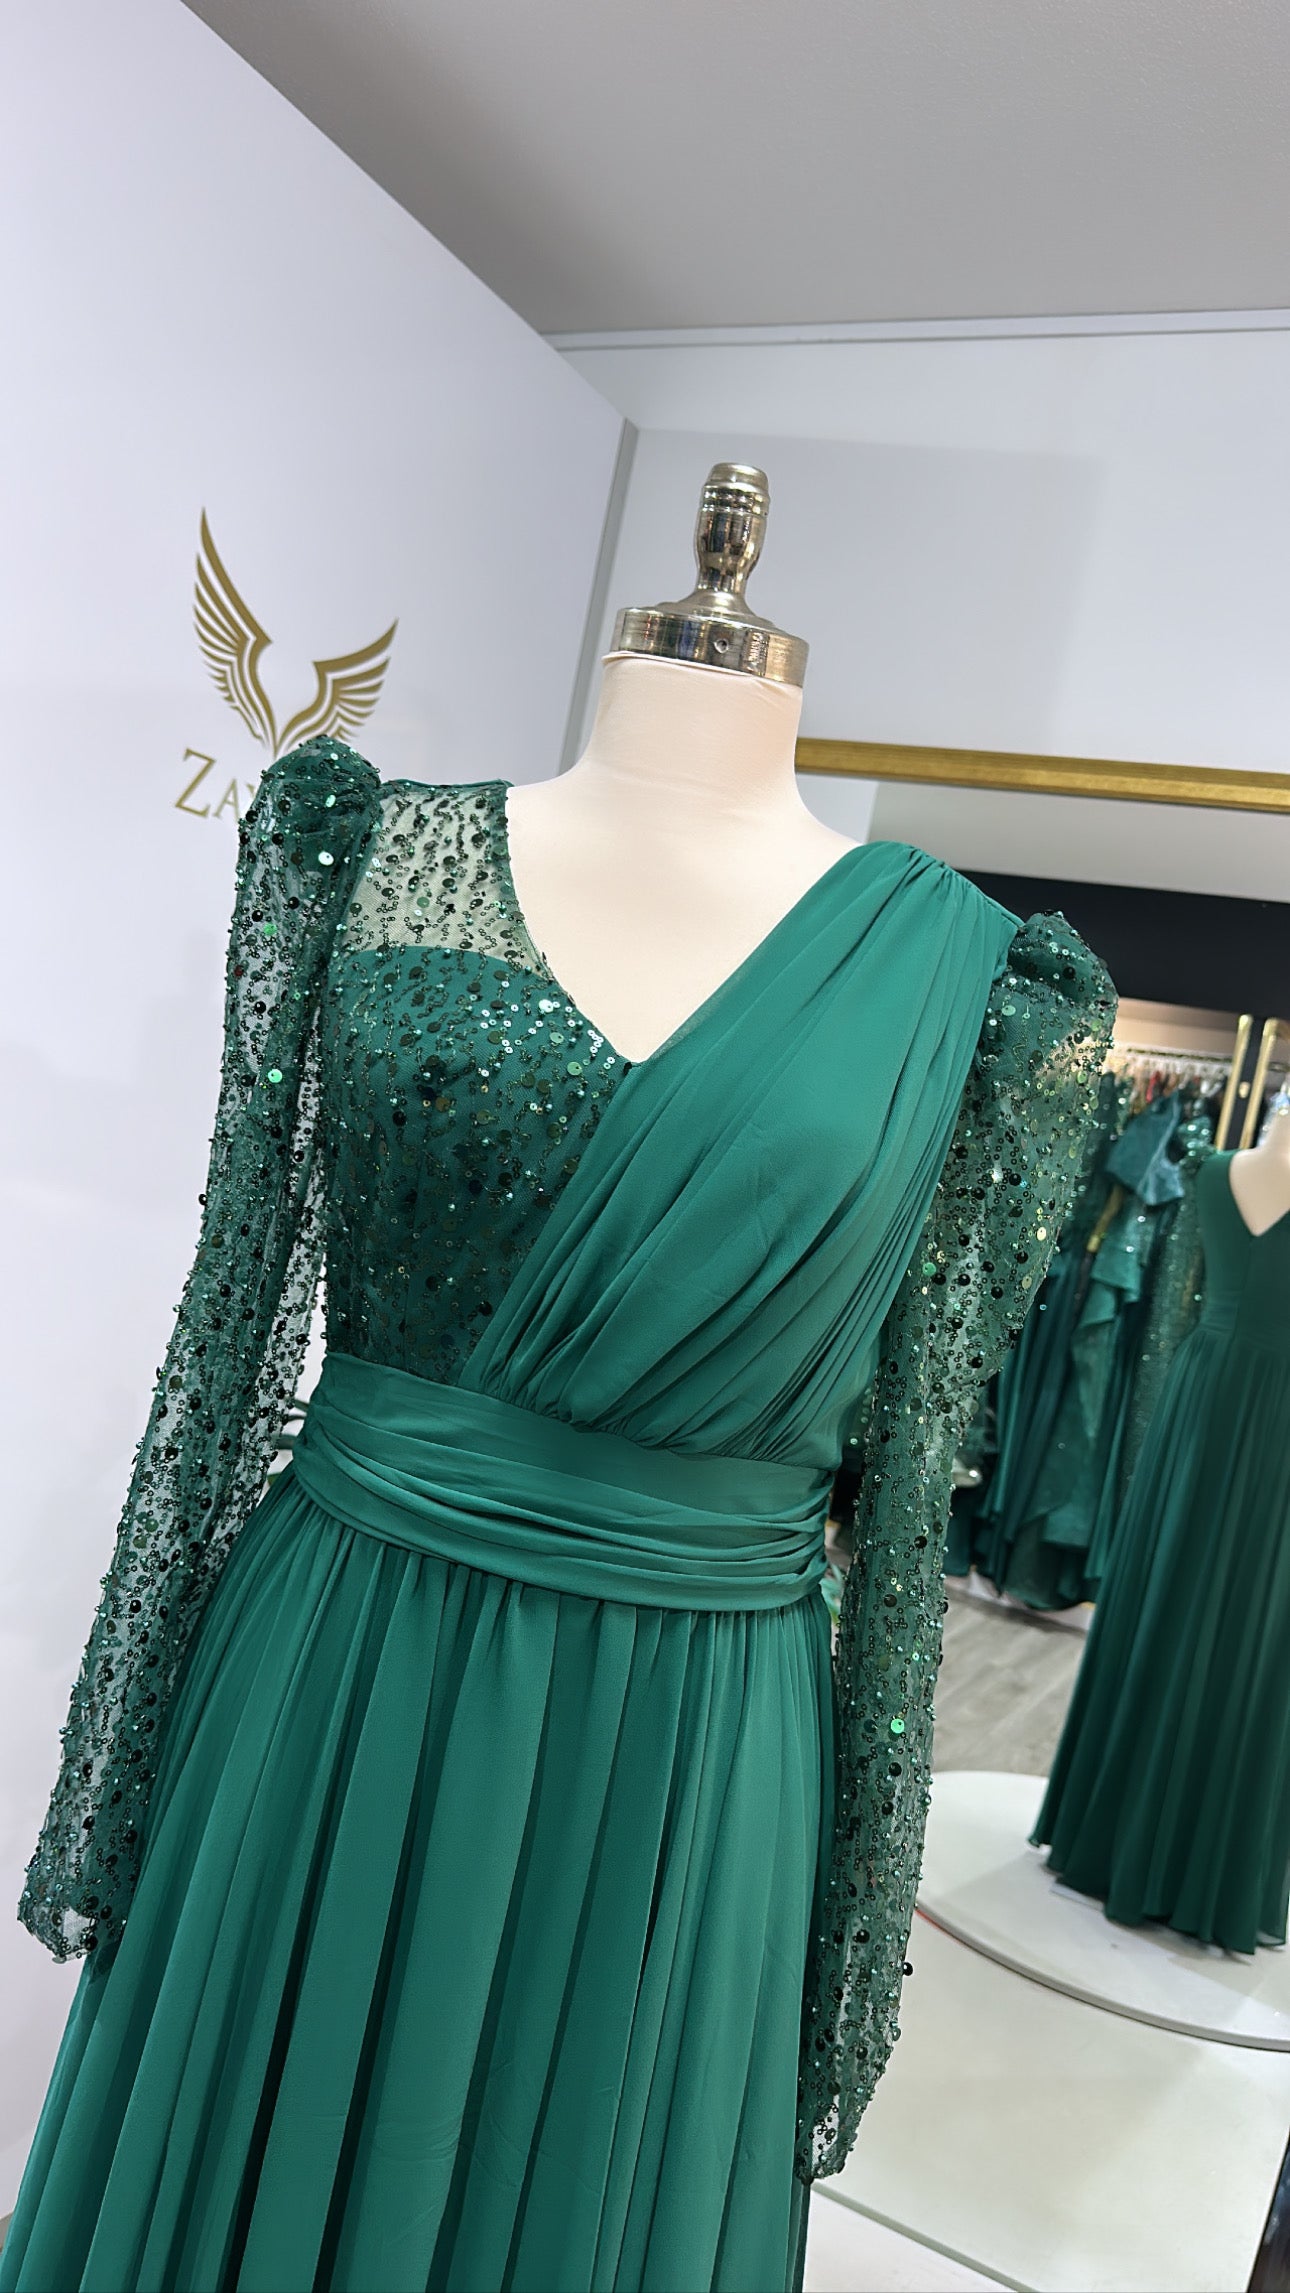 Elegant green dress with sequins and crepe fabric